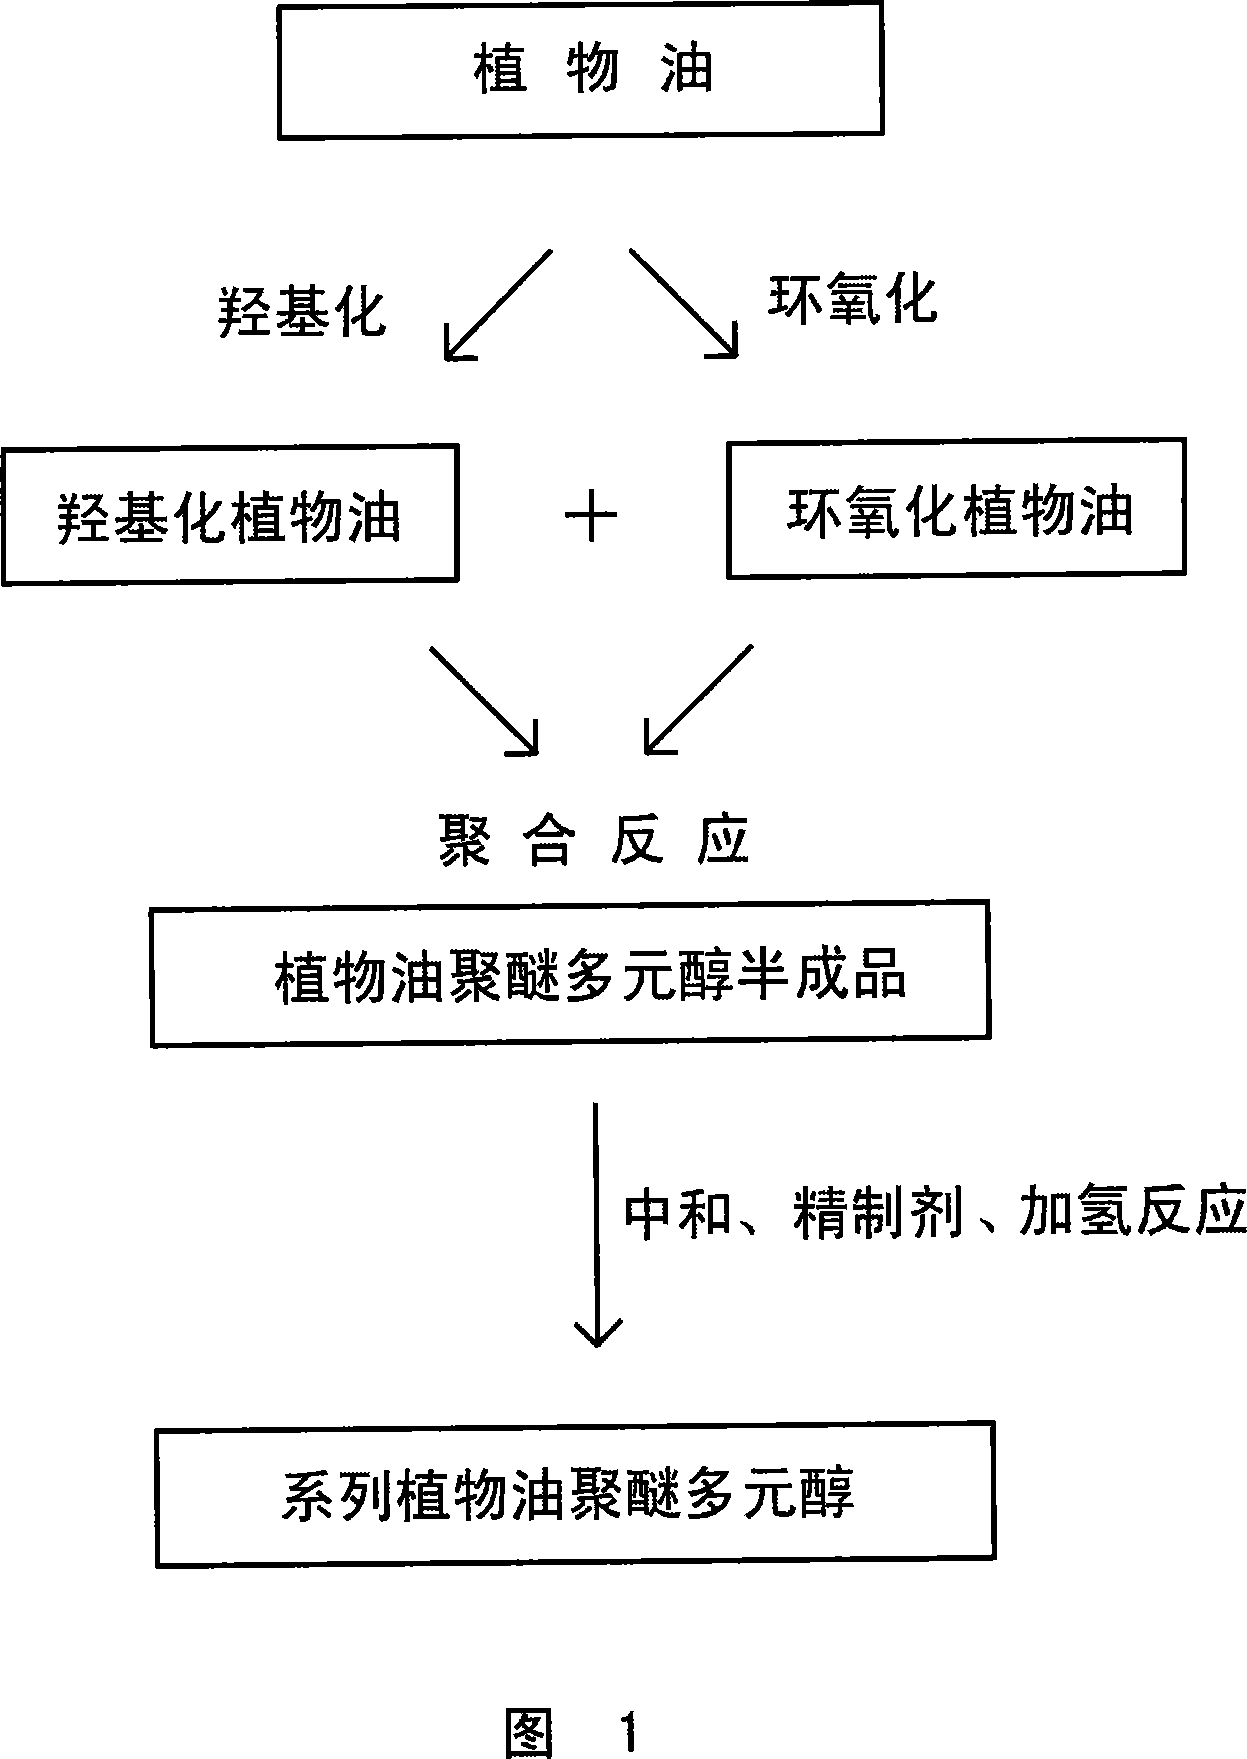 Method for preparing polyether polyol from plant oil